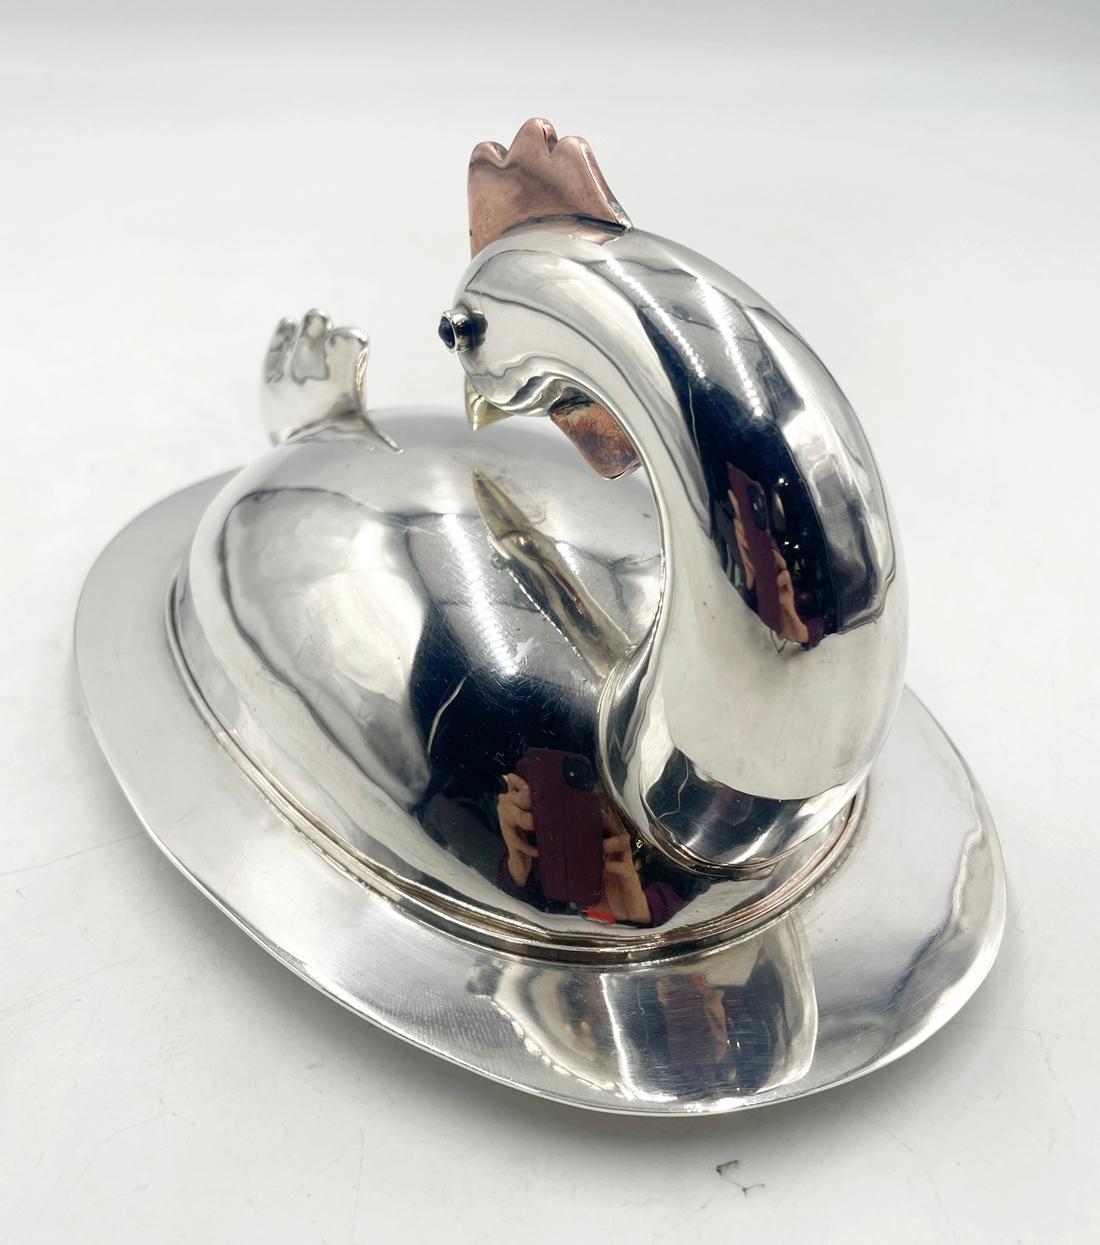 Introducing the exquisite Silver Plated, Copper & Brass Butter Dish by renowned artist Emilia Castillo, a true masterpiece of Mexico Modernism. This captivating piece showcases the perfect blend of elegance and functionality, meticulously